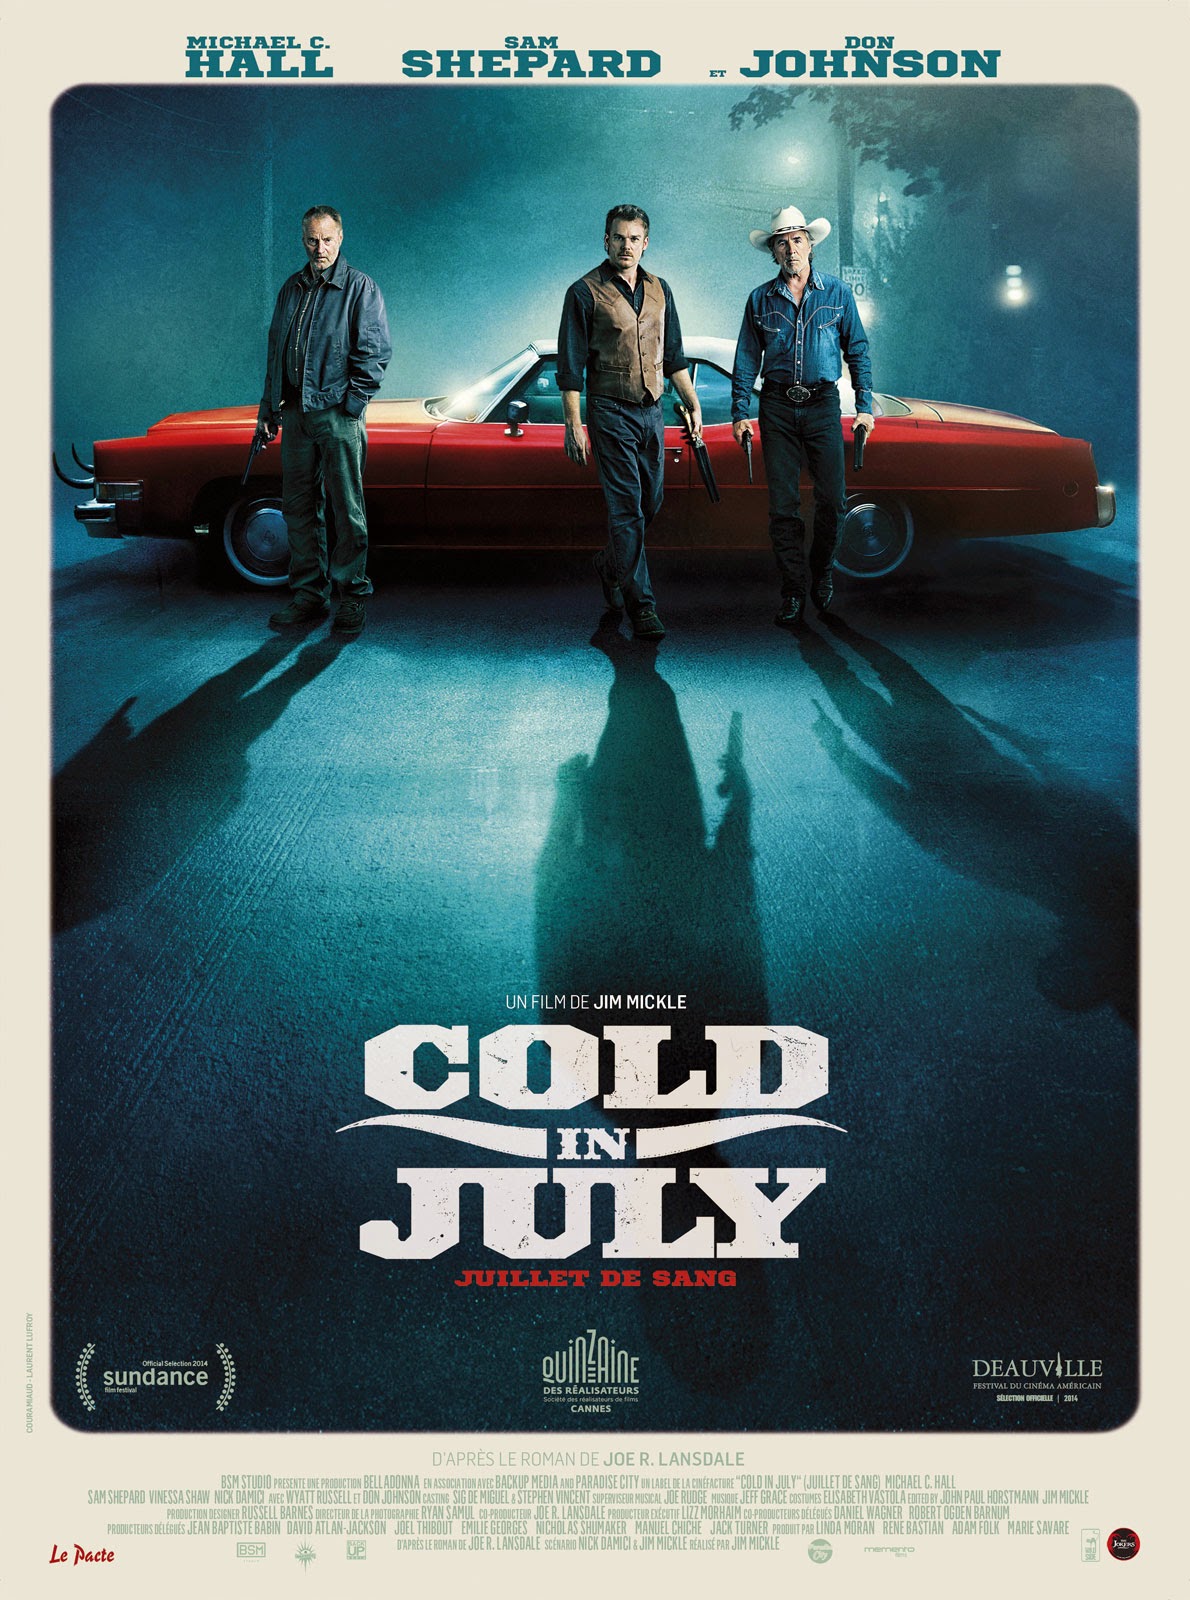 http://fuckingcinephiles.blogspot.fr/2014/12/critique-cold-in-july.html